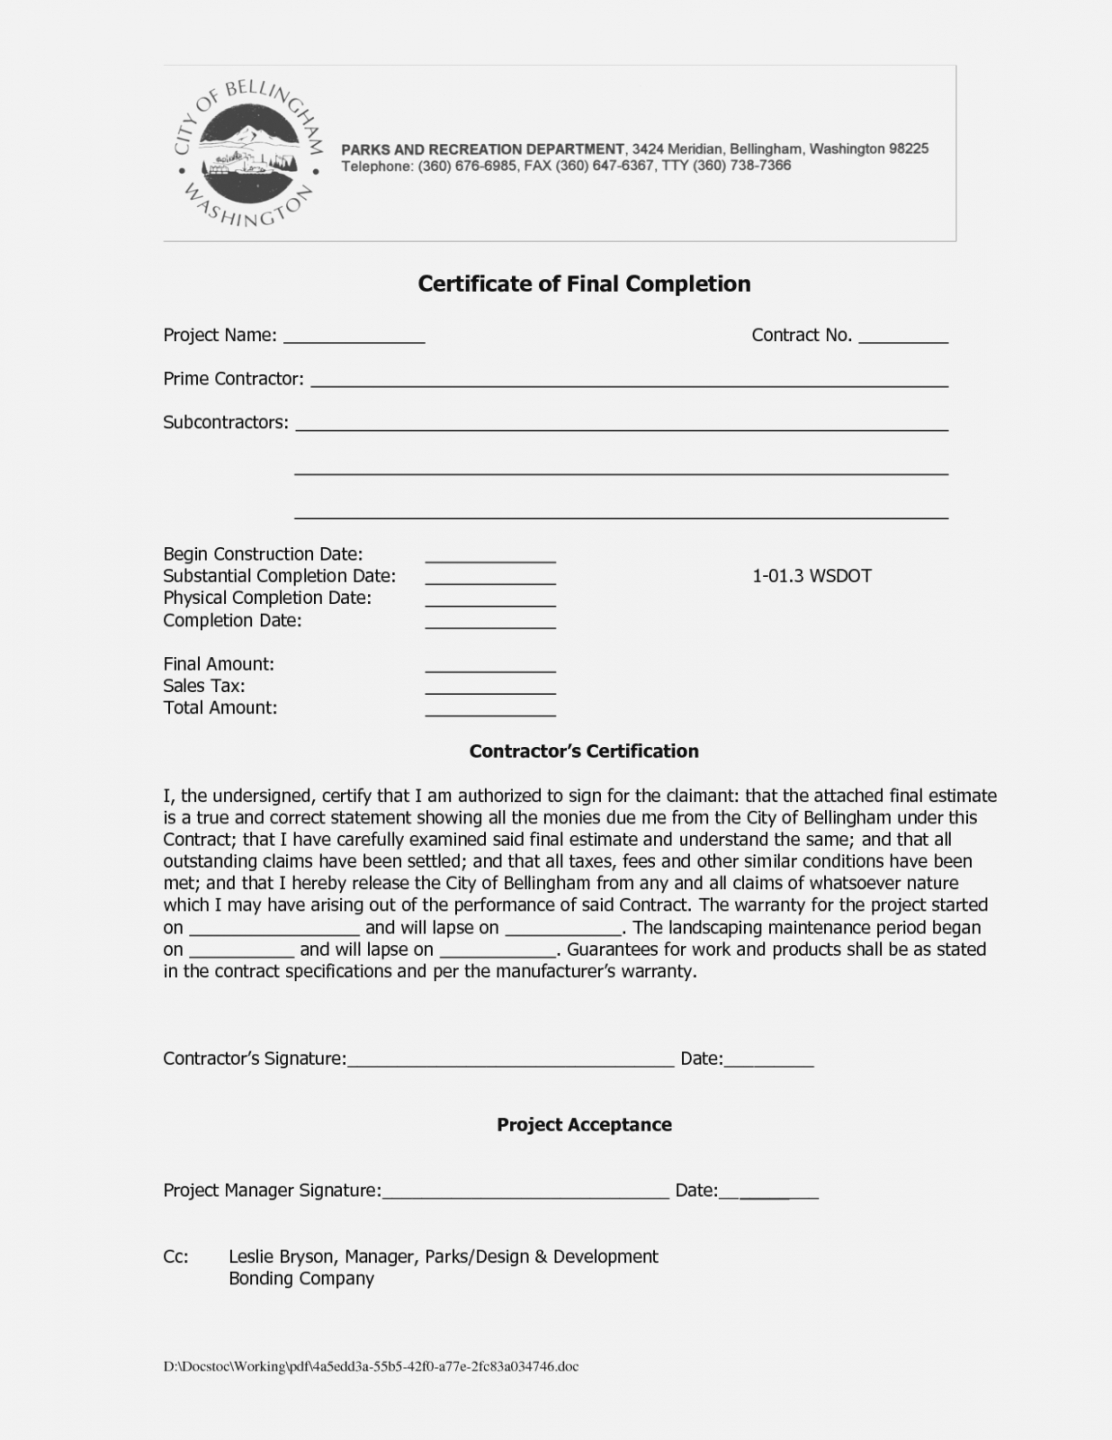 Roofing Certificate Of Completion Template - Zimer.bwong.co Regarding Certificate Of Completion Template Construction